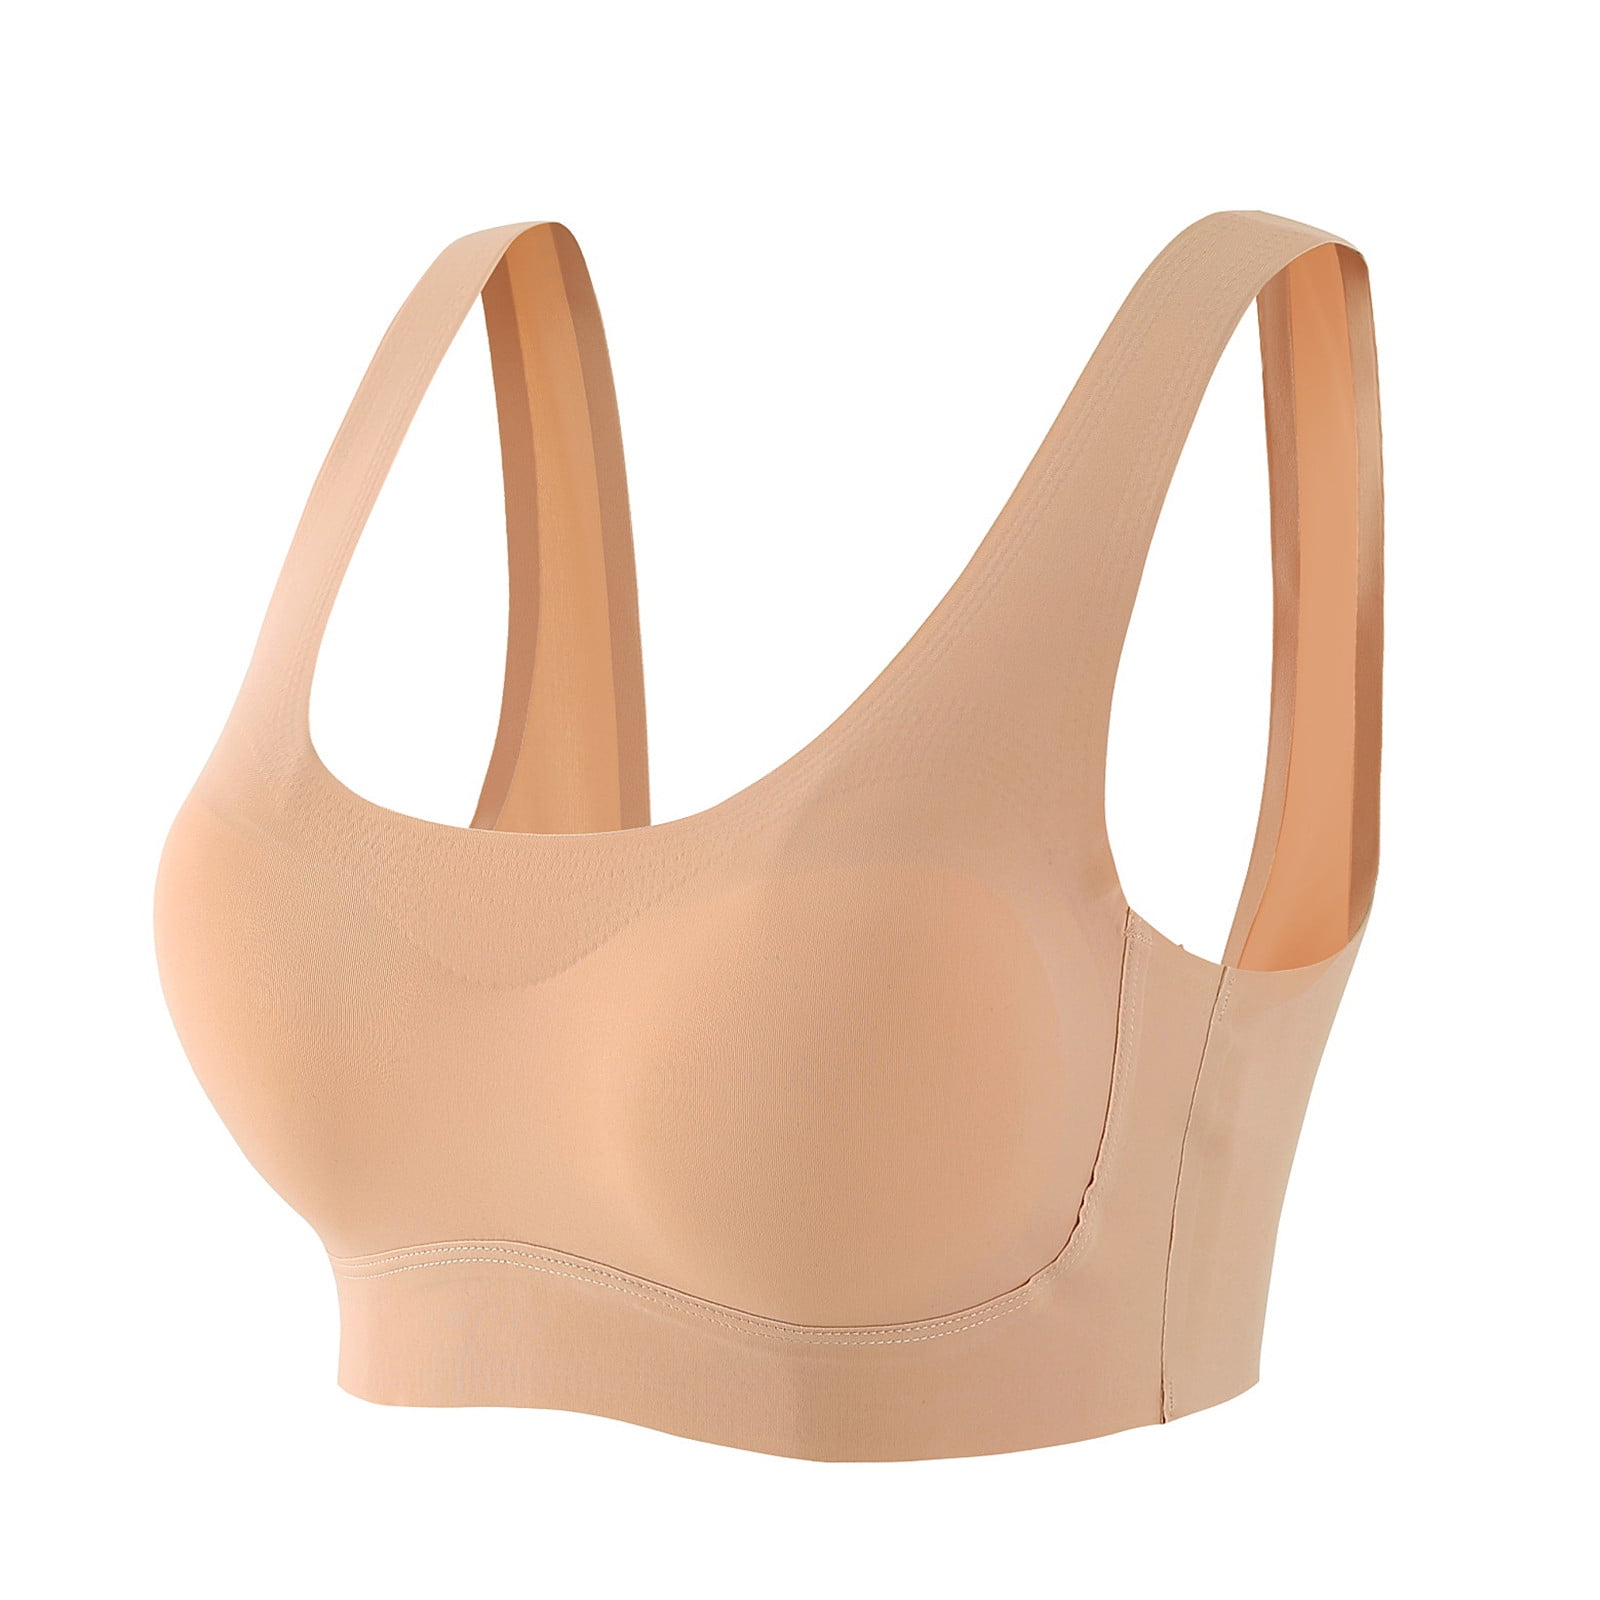 Bowake Women's Bra For Every Day Wear Exercise And Offers Back